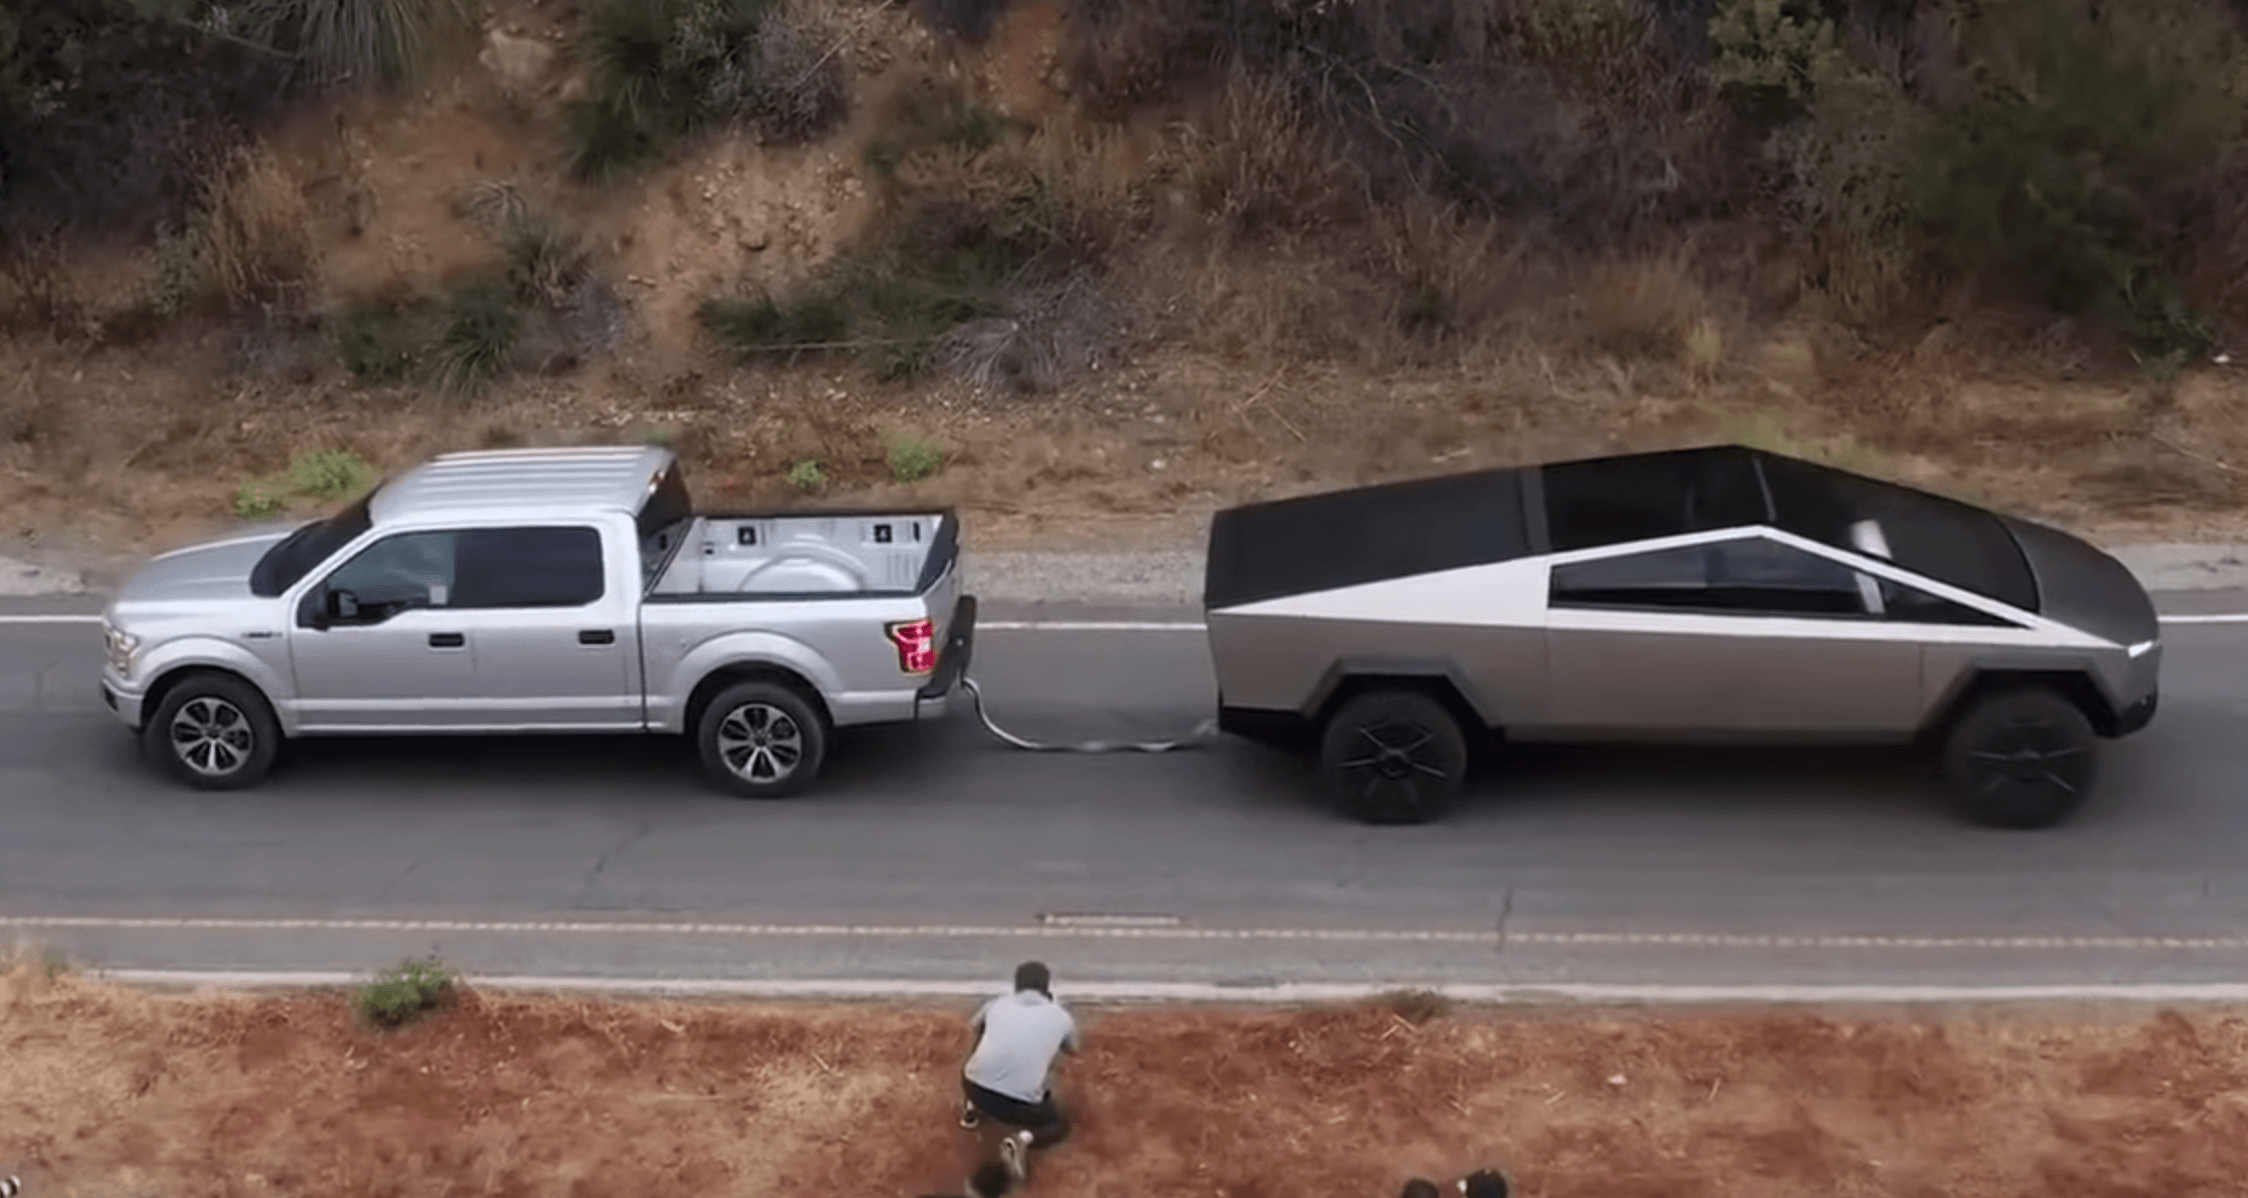 Tesla's Cybertruck Tug Of War Against A Ford F 150 Proves